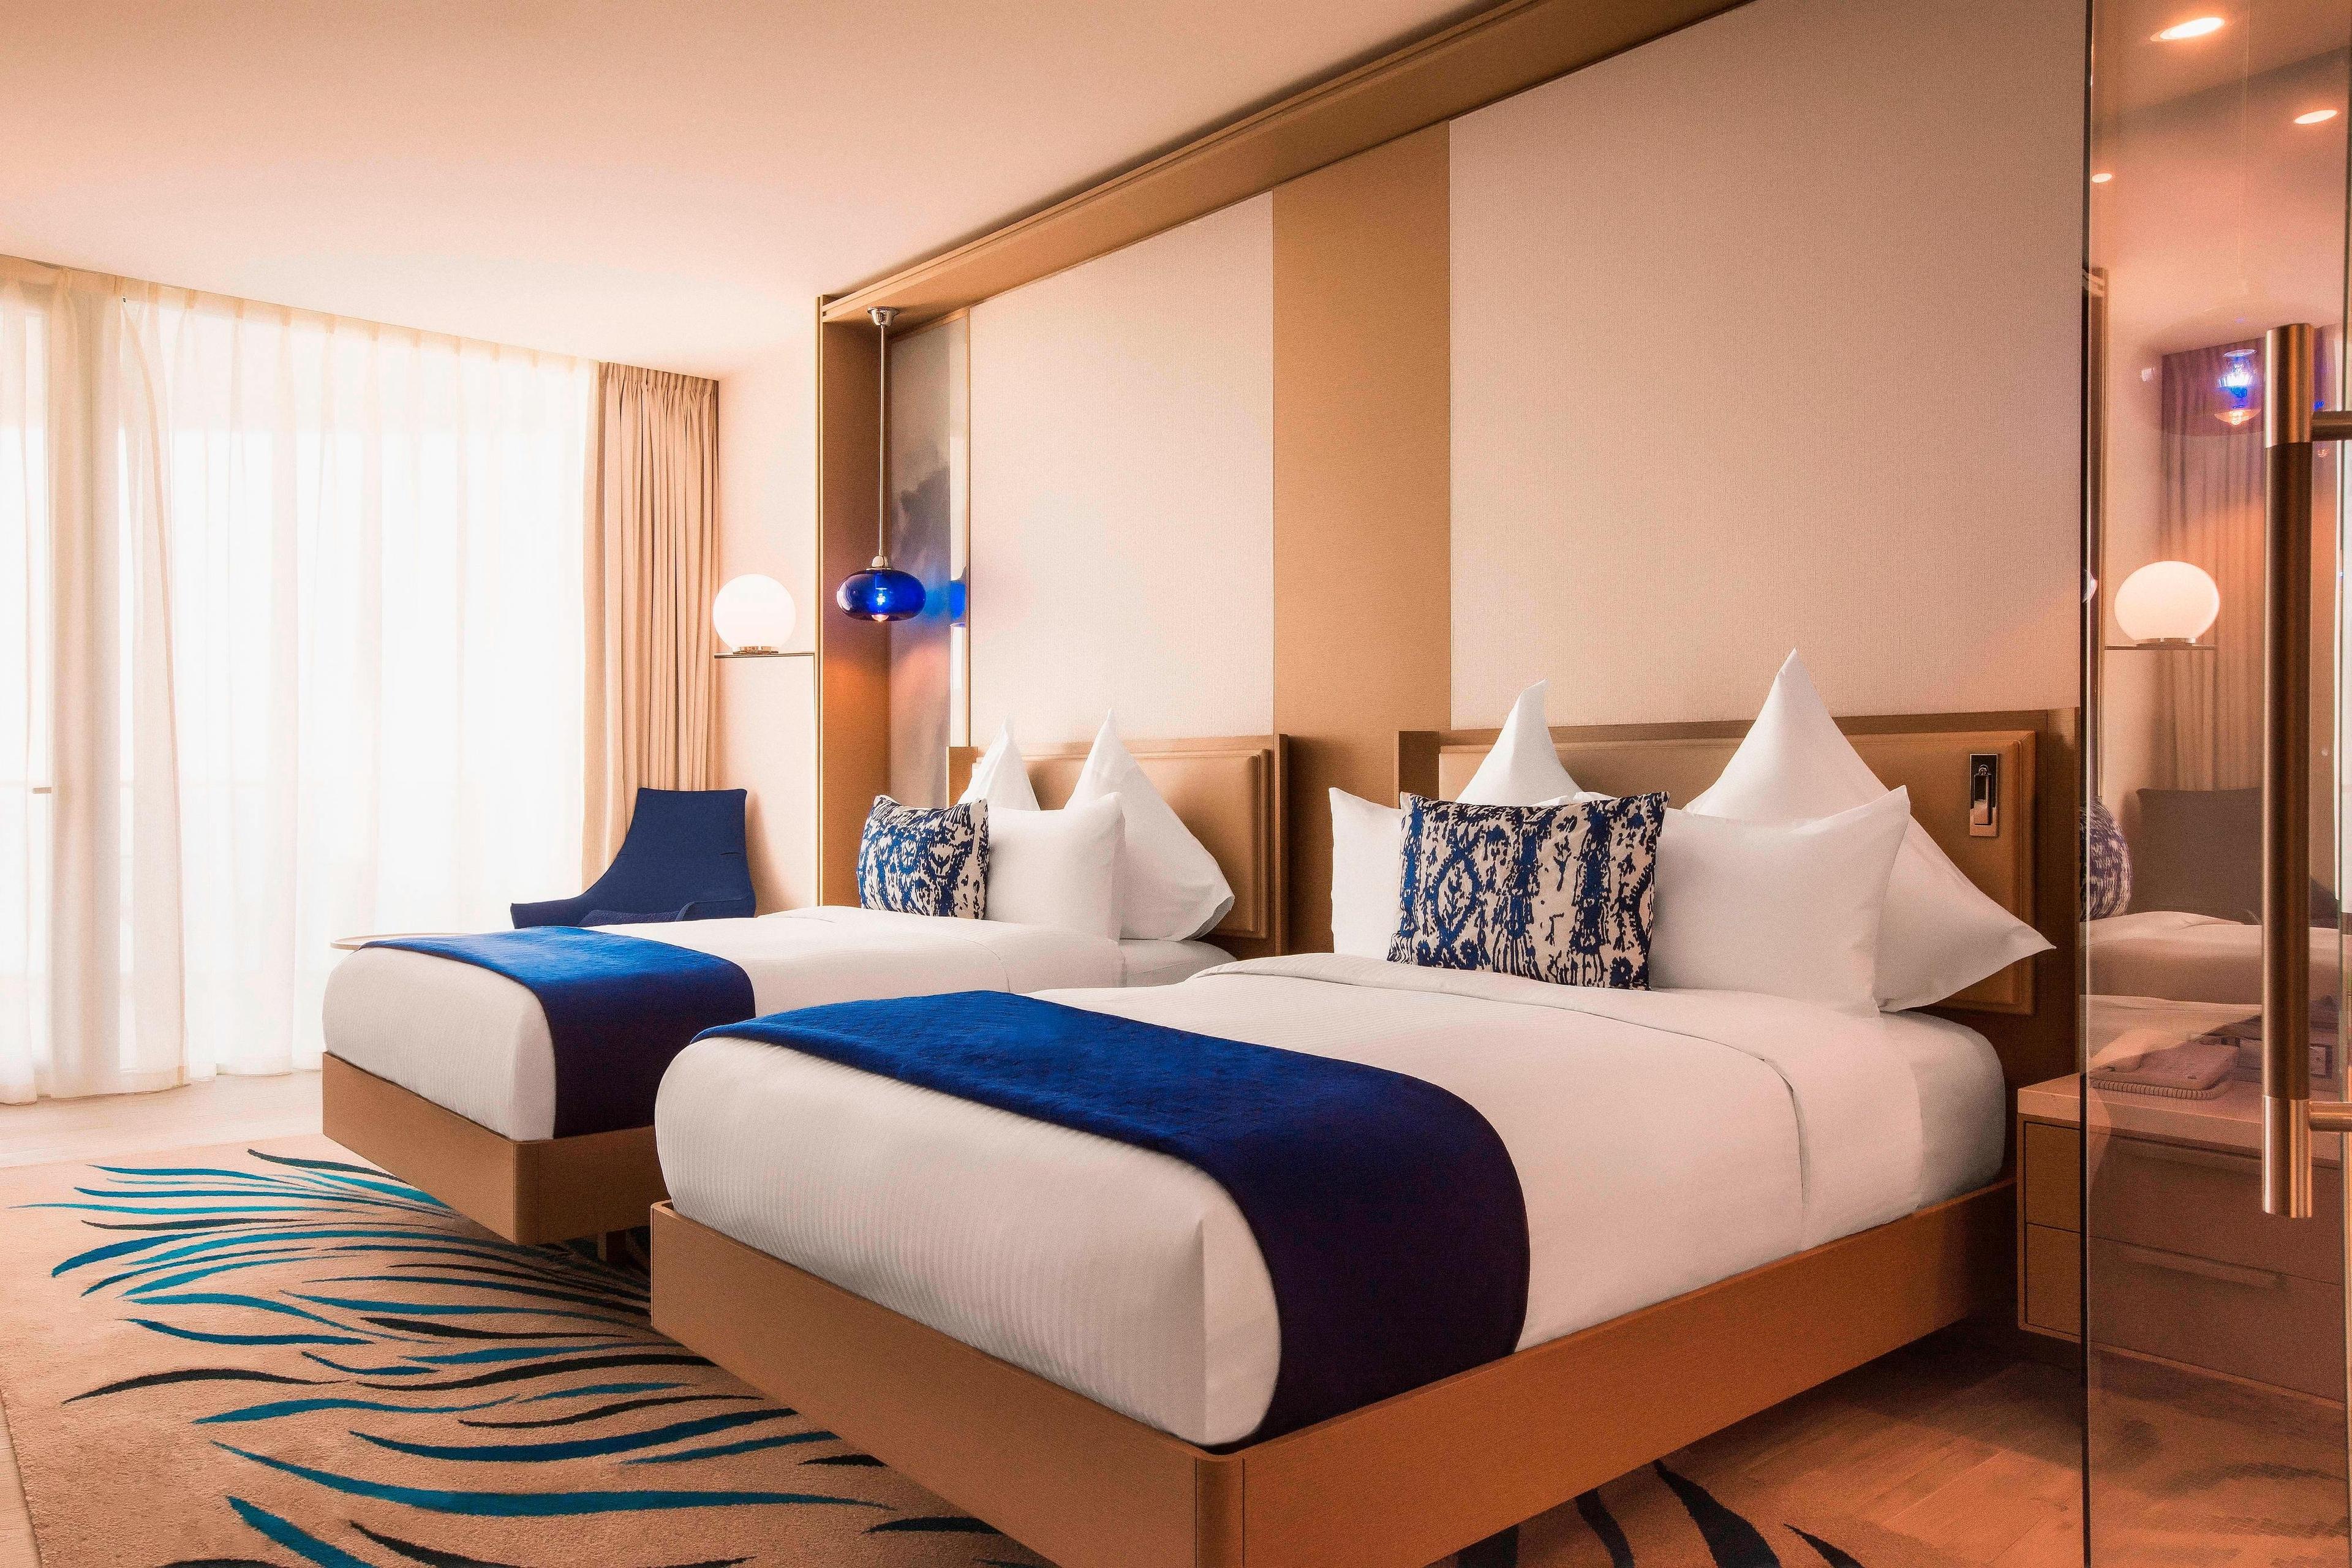 Our Deluxe Double room includes two soft queen size double beds, a comfortable living area and a private balcony. The bathroom is equipped with both a bathtub and power shower, encased in a pristine glass screen.